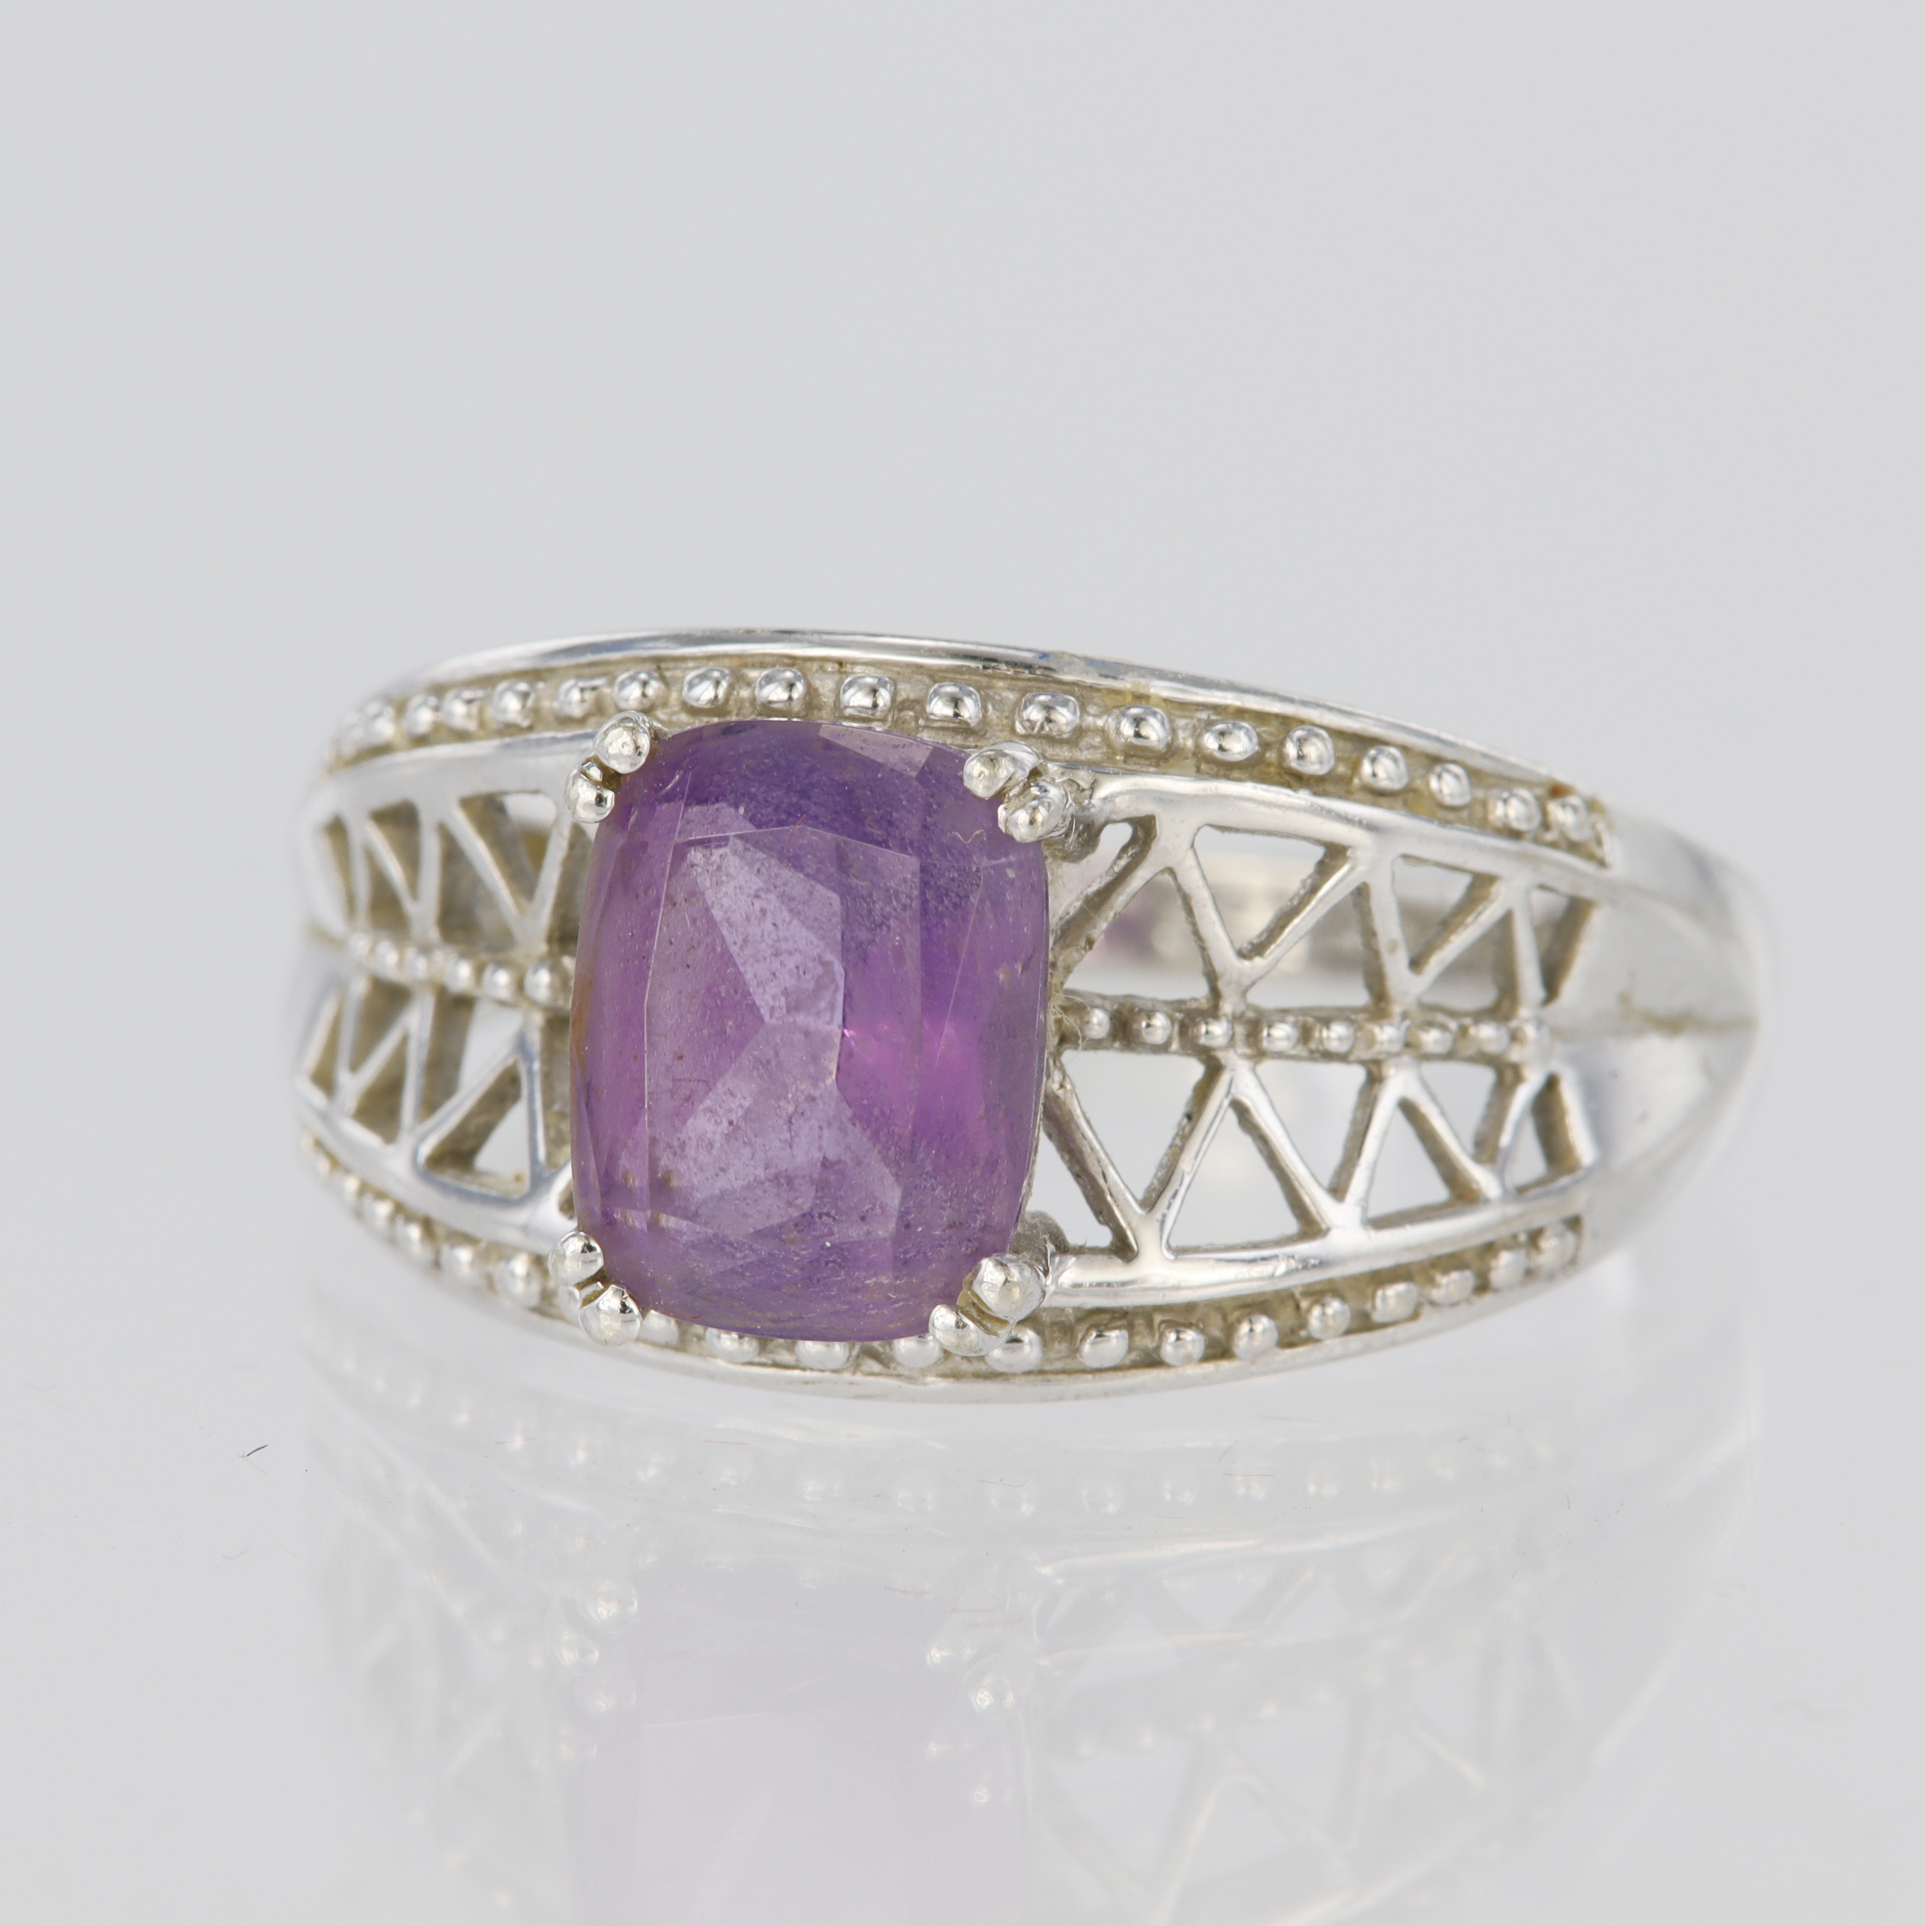 9ct white gold ring set with a single cushion shaped amethyst measuring approx. 9mm x 7mm with a